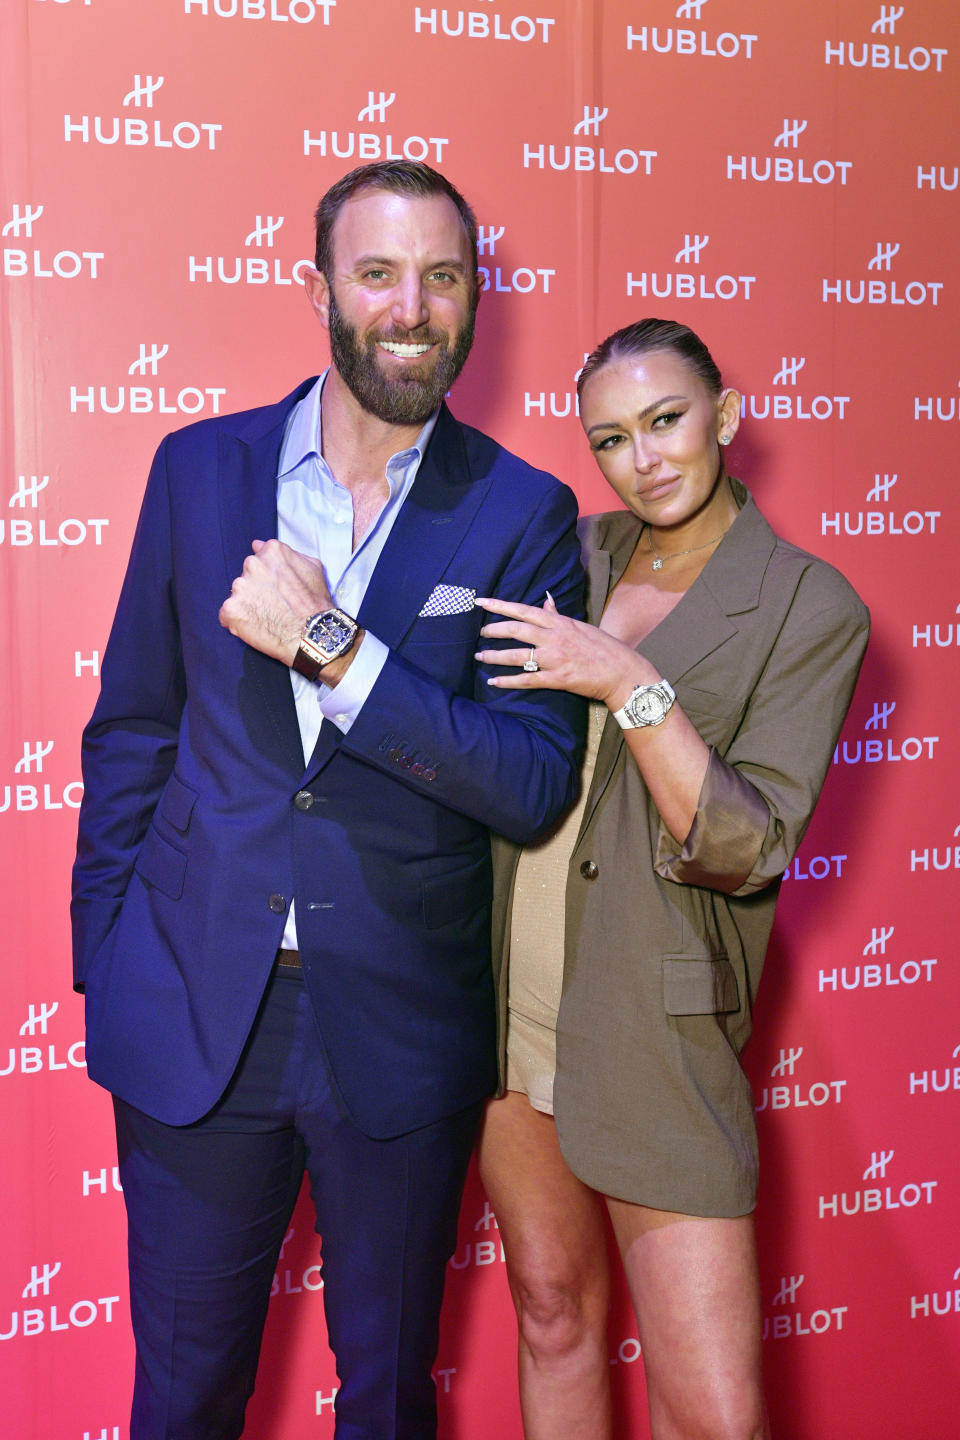 (Photo by Eugene Gologursky/Getty Images for Hublot)